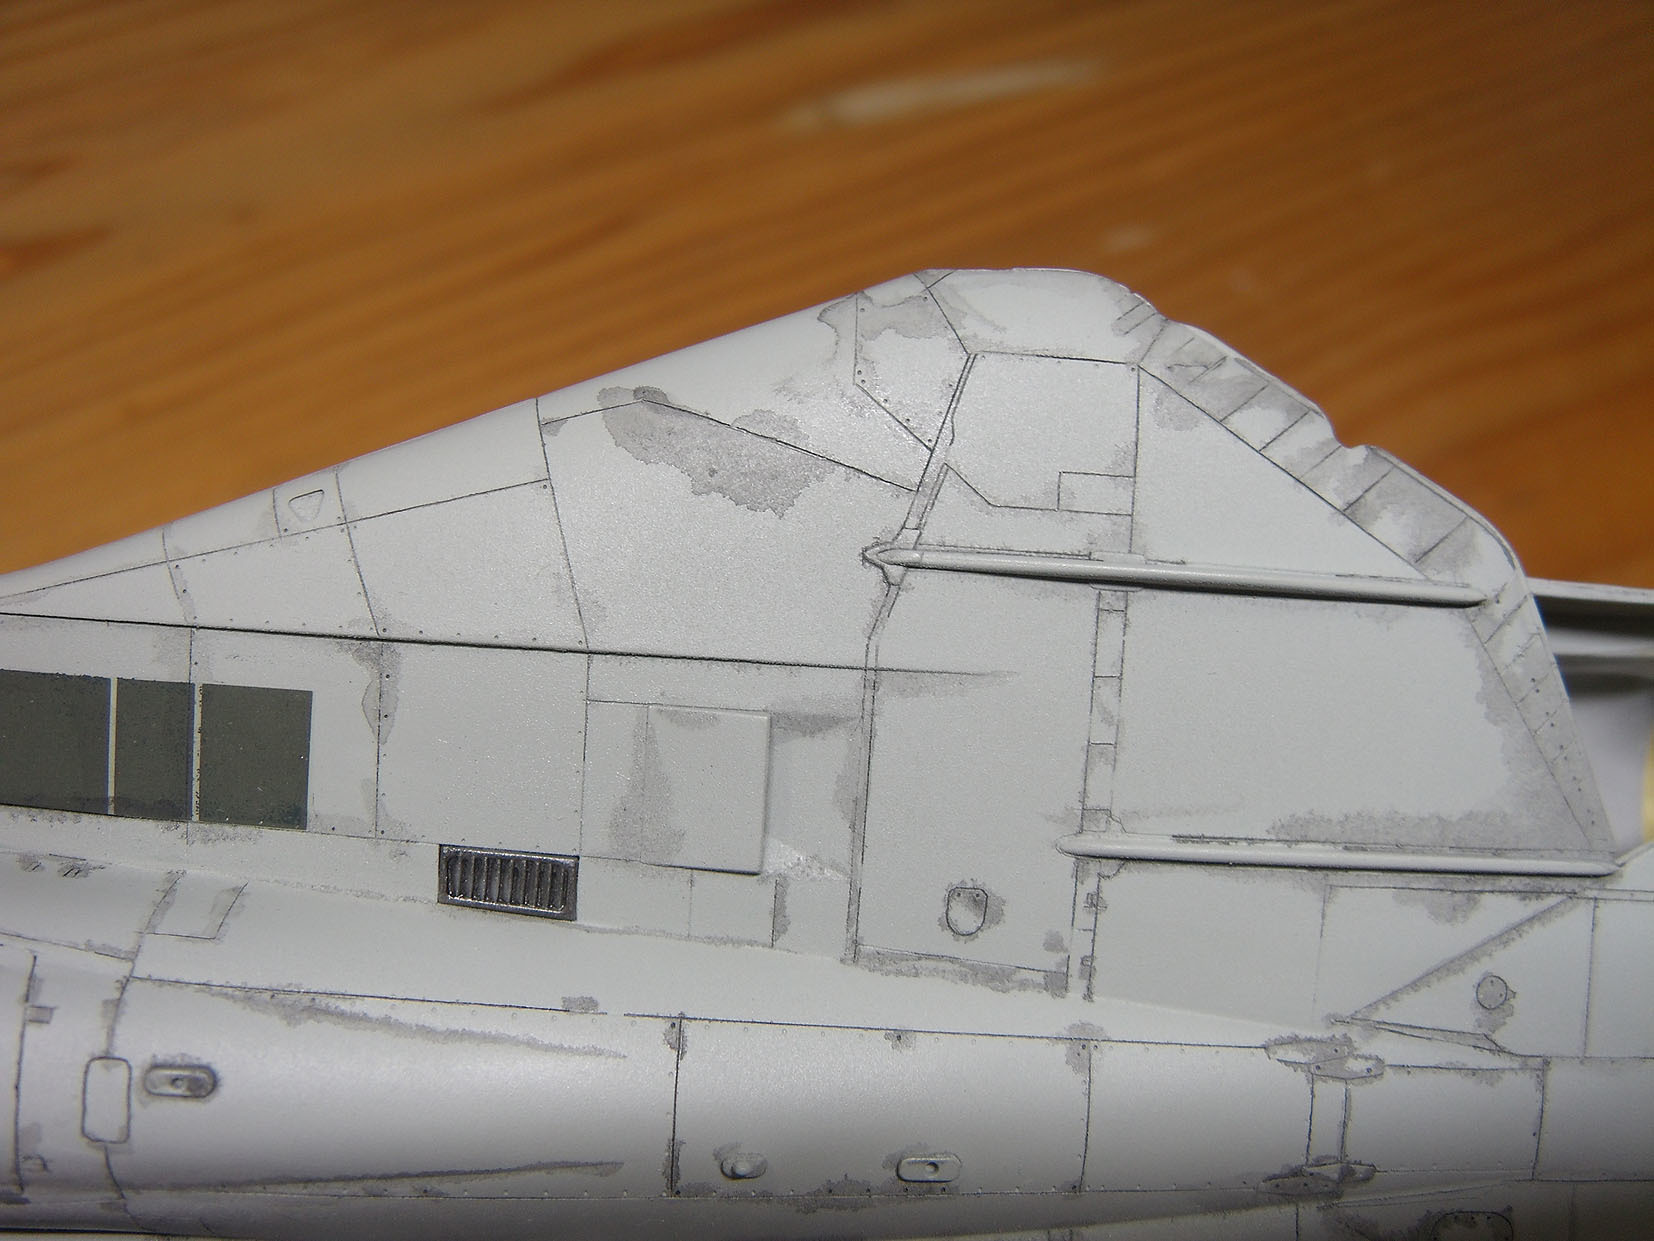 F-14A トムキャット（ハセガワ 1/72 新版）製作記 その10 - F-14A ハセガワ 1/72（新版）